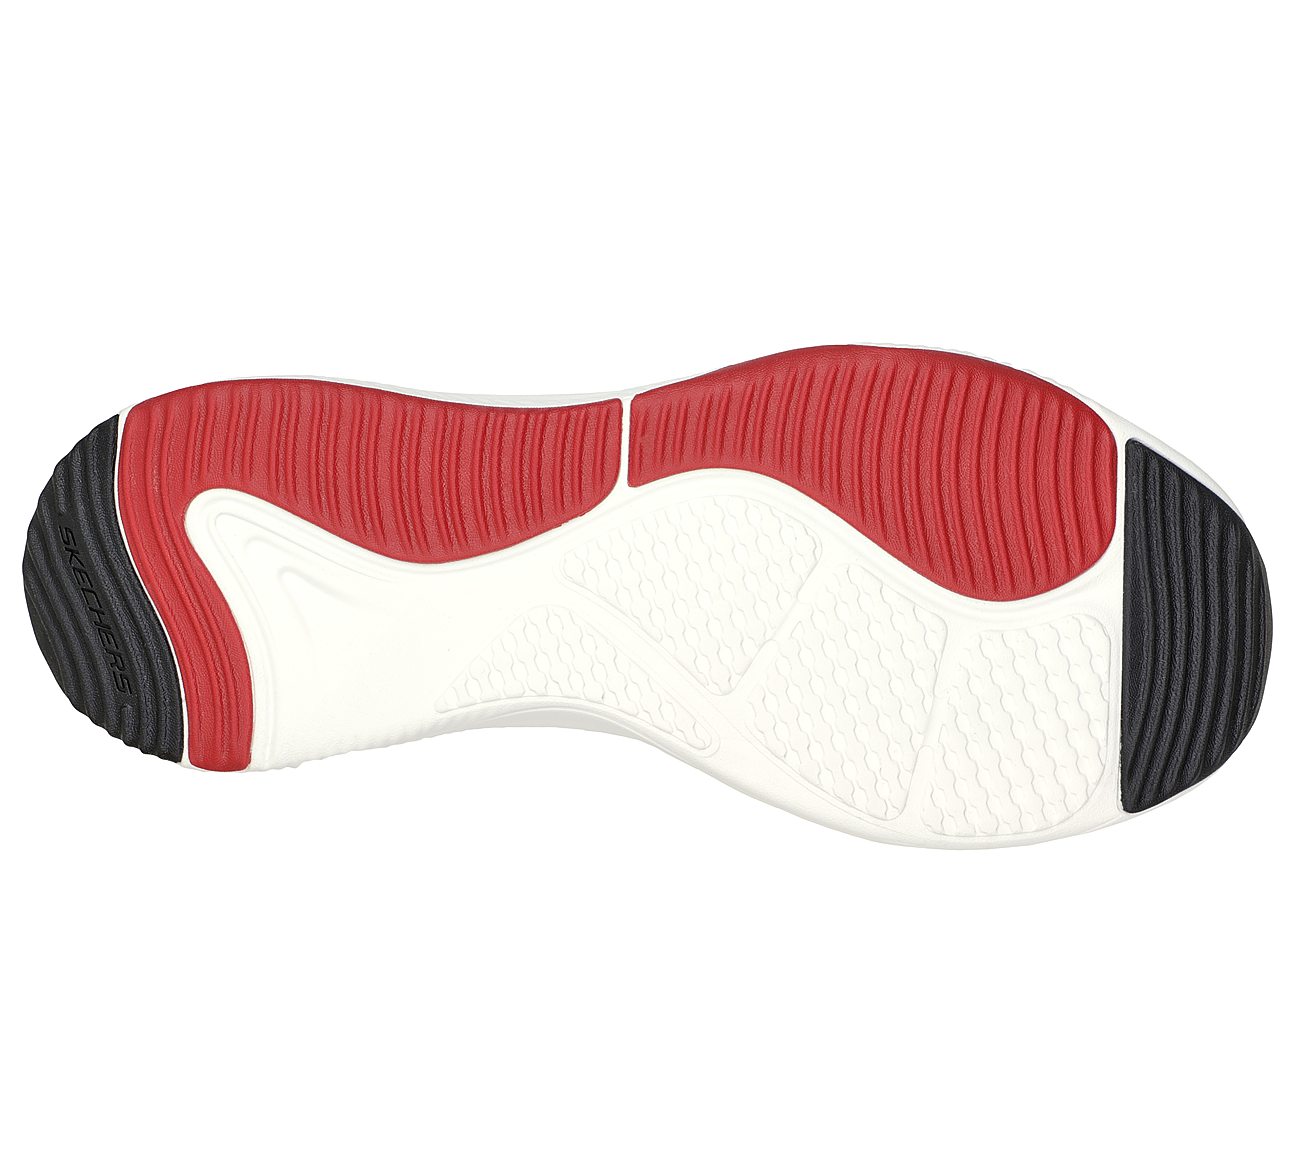  D'LUX FITNESS-BOX JUMP, WWHITE/BLACK/RED Footwear Bottom View